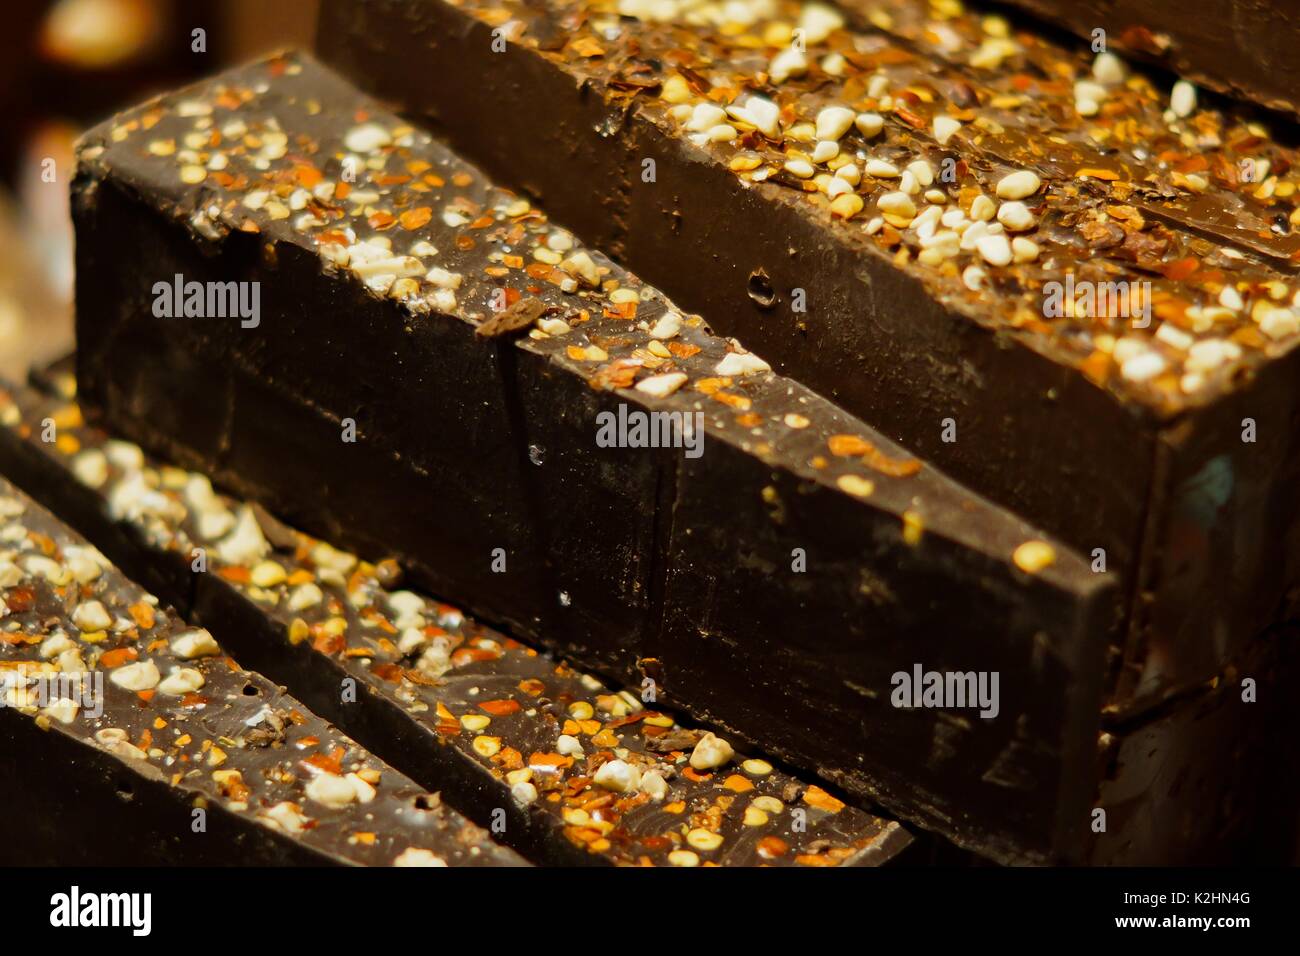 Confectionery close up Stock Photo